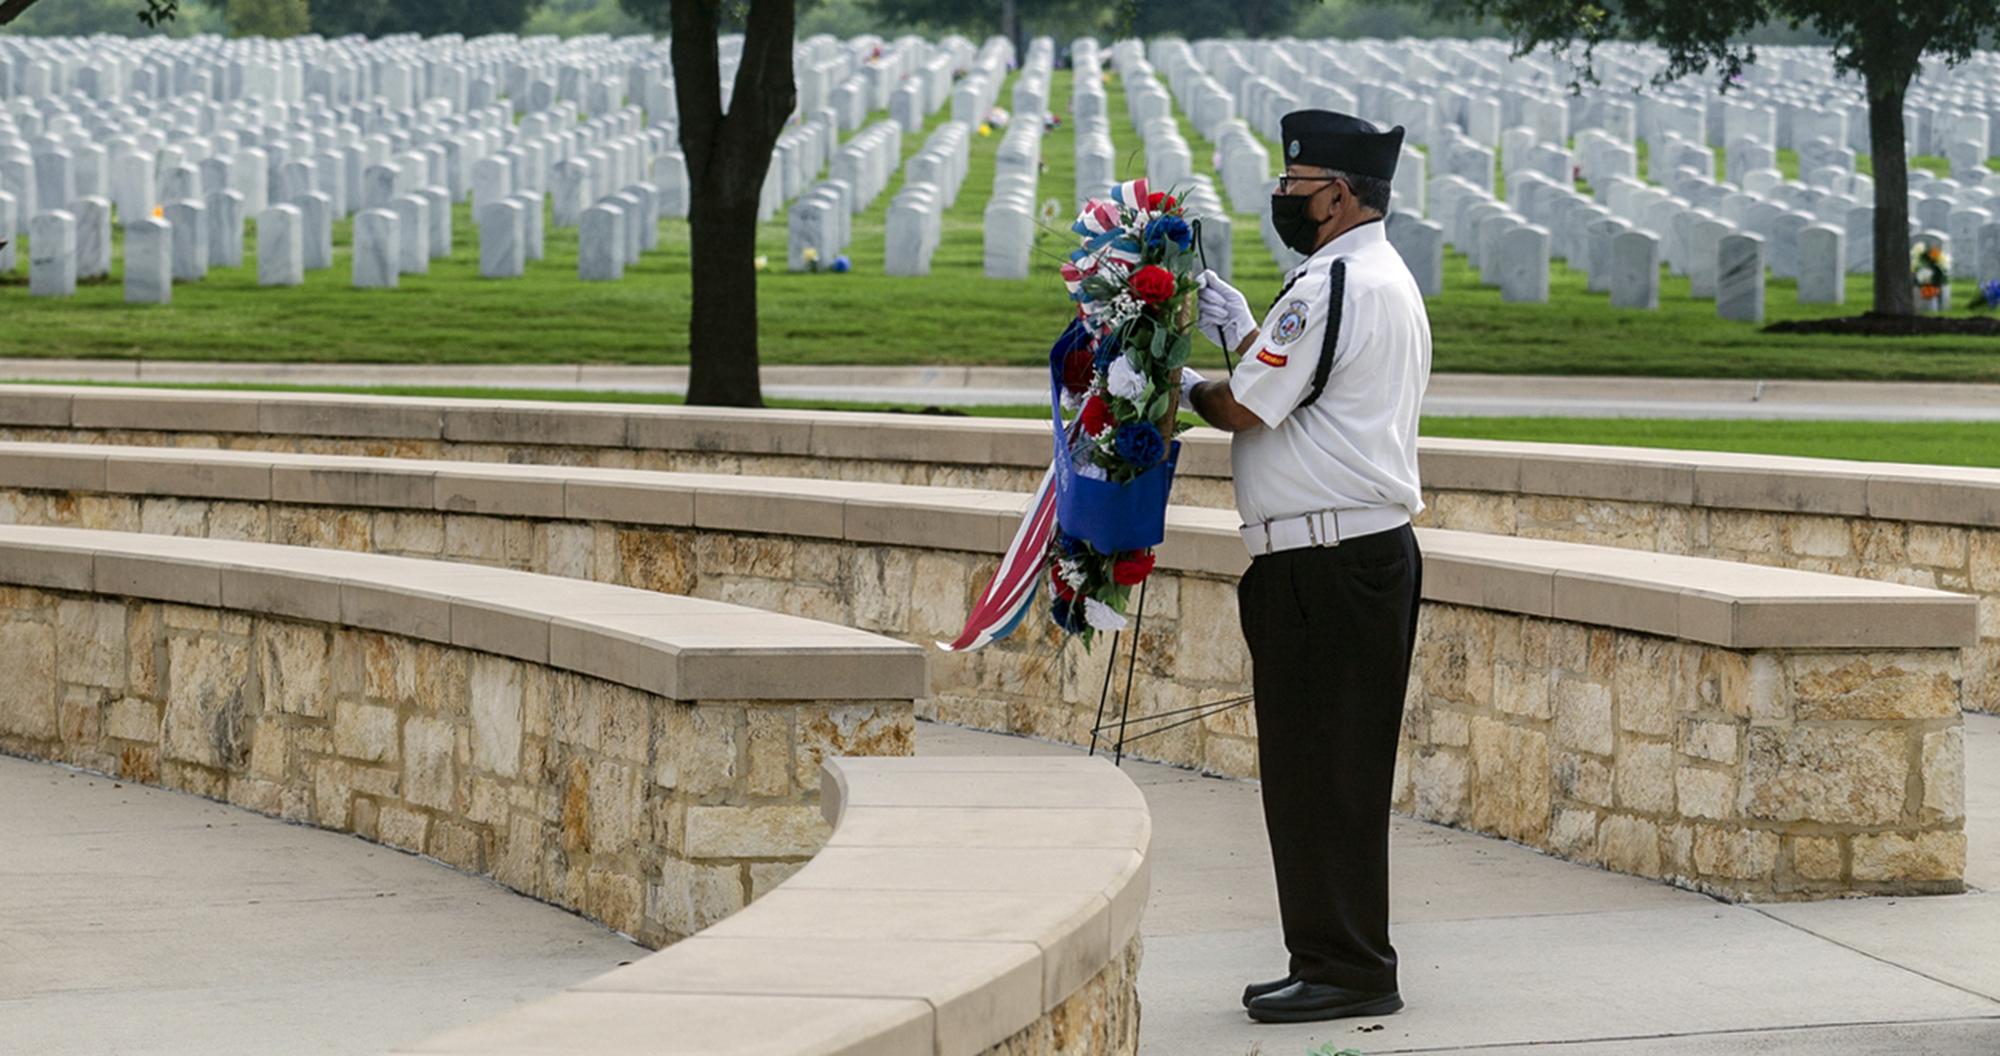 Tribute was real, but San Antonio’s annual Memorial Day ceremony was